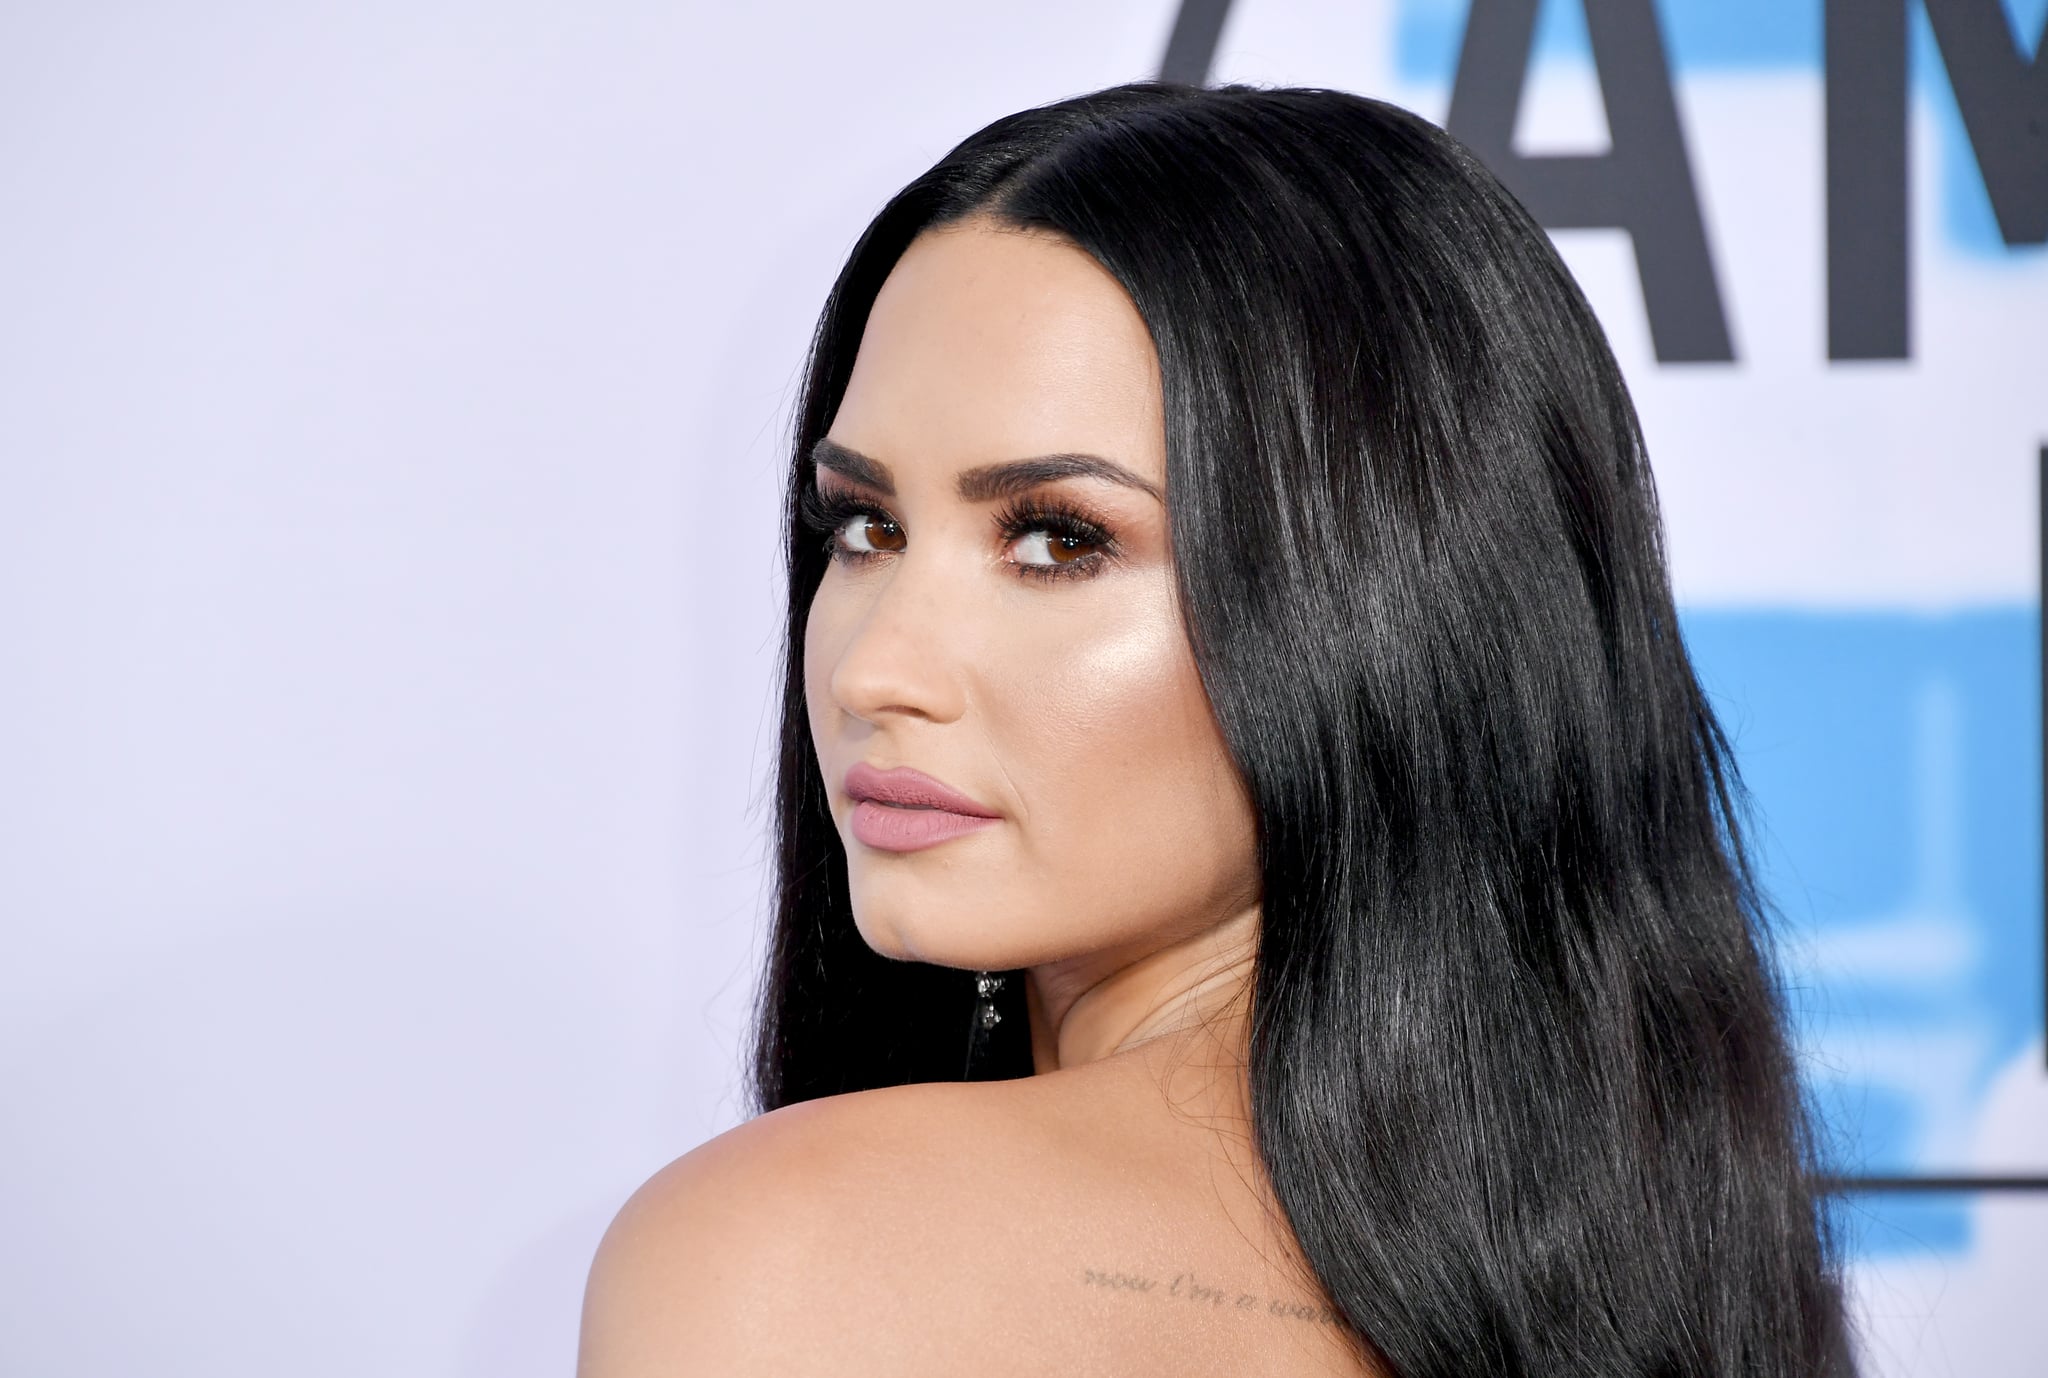 LOS ANGELES, CA - NOVEMBER 19:  Demi Lovato attends the 2017 American Music Awards at Microsoft Theater on November 19, 2017 in Los Angeles, California.  (Photo by Neilson Barnard/Getty Images)